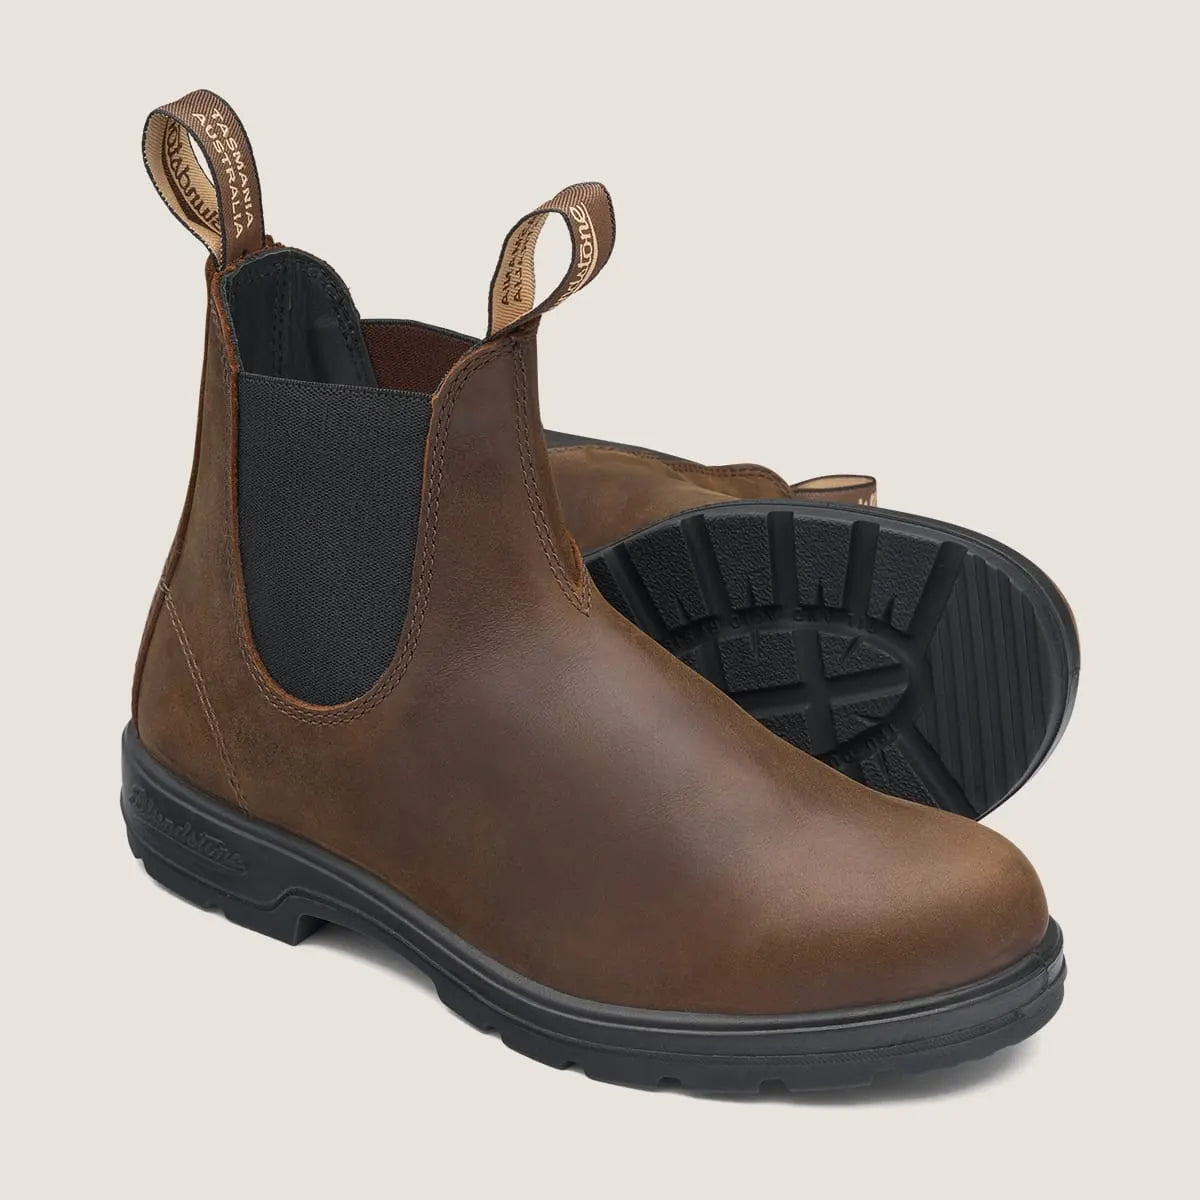 Blundstone 1609 Chelsea Dress Boots in Antique Brown